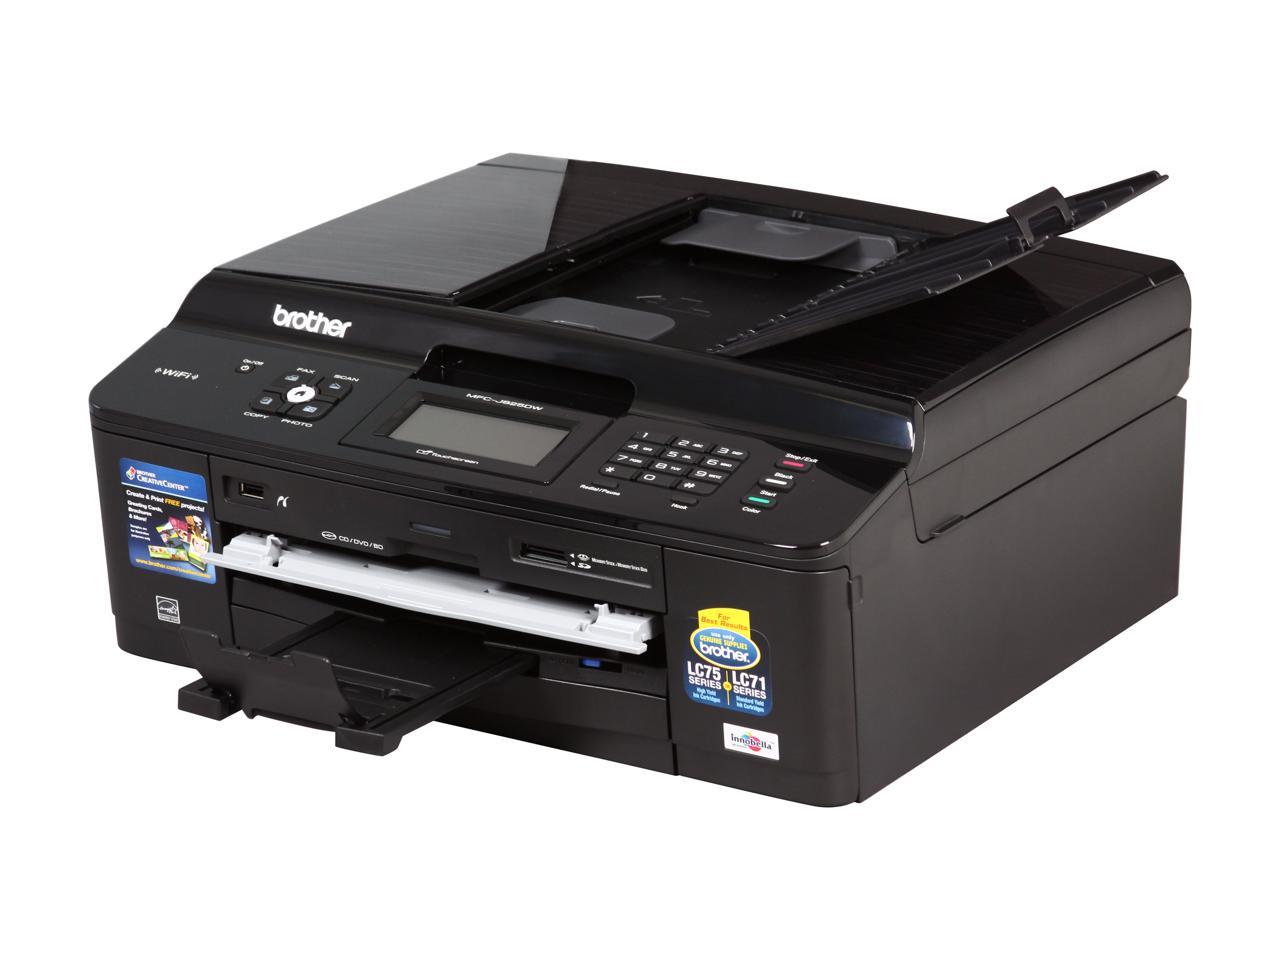 Brand New Brother MFC-J870DW Wireless All-in-one Inkjet Printer Replace J825DW 